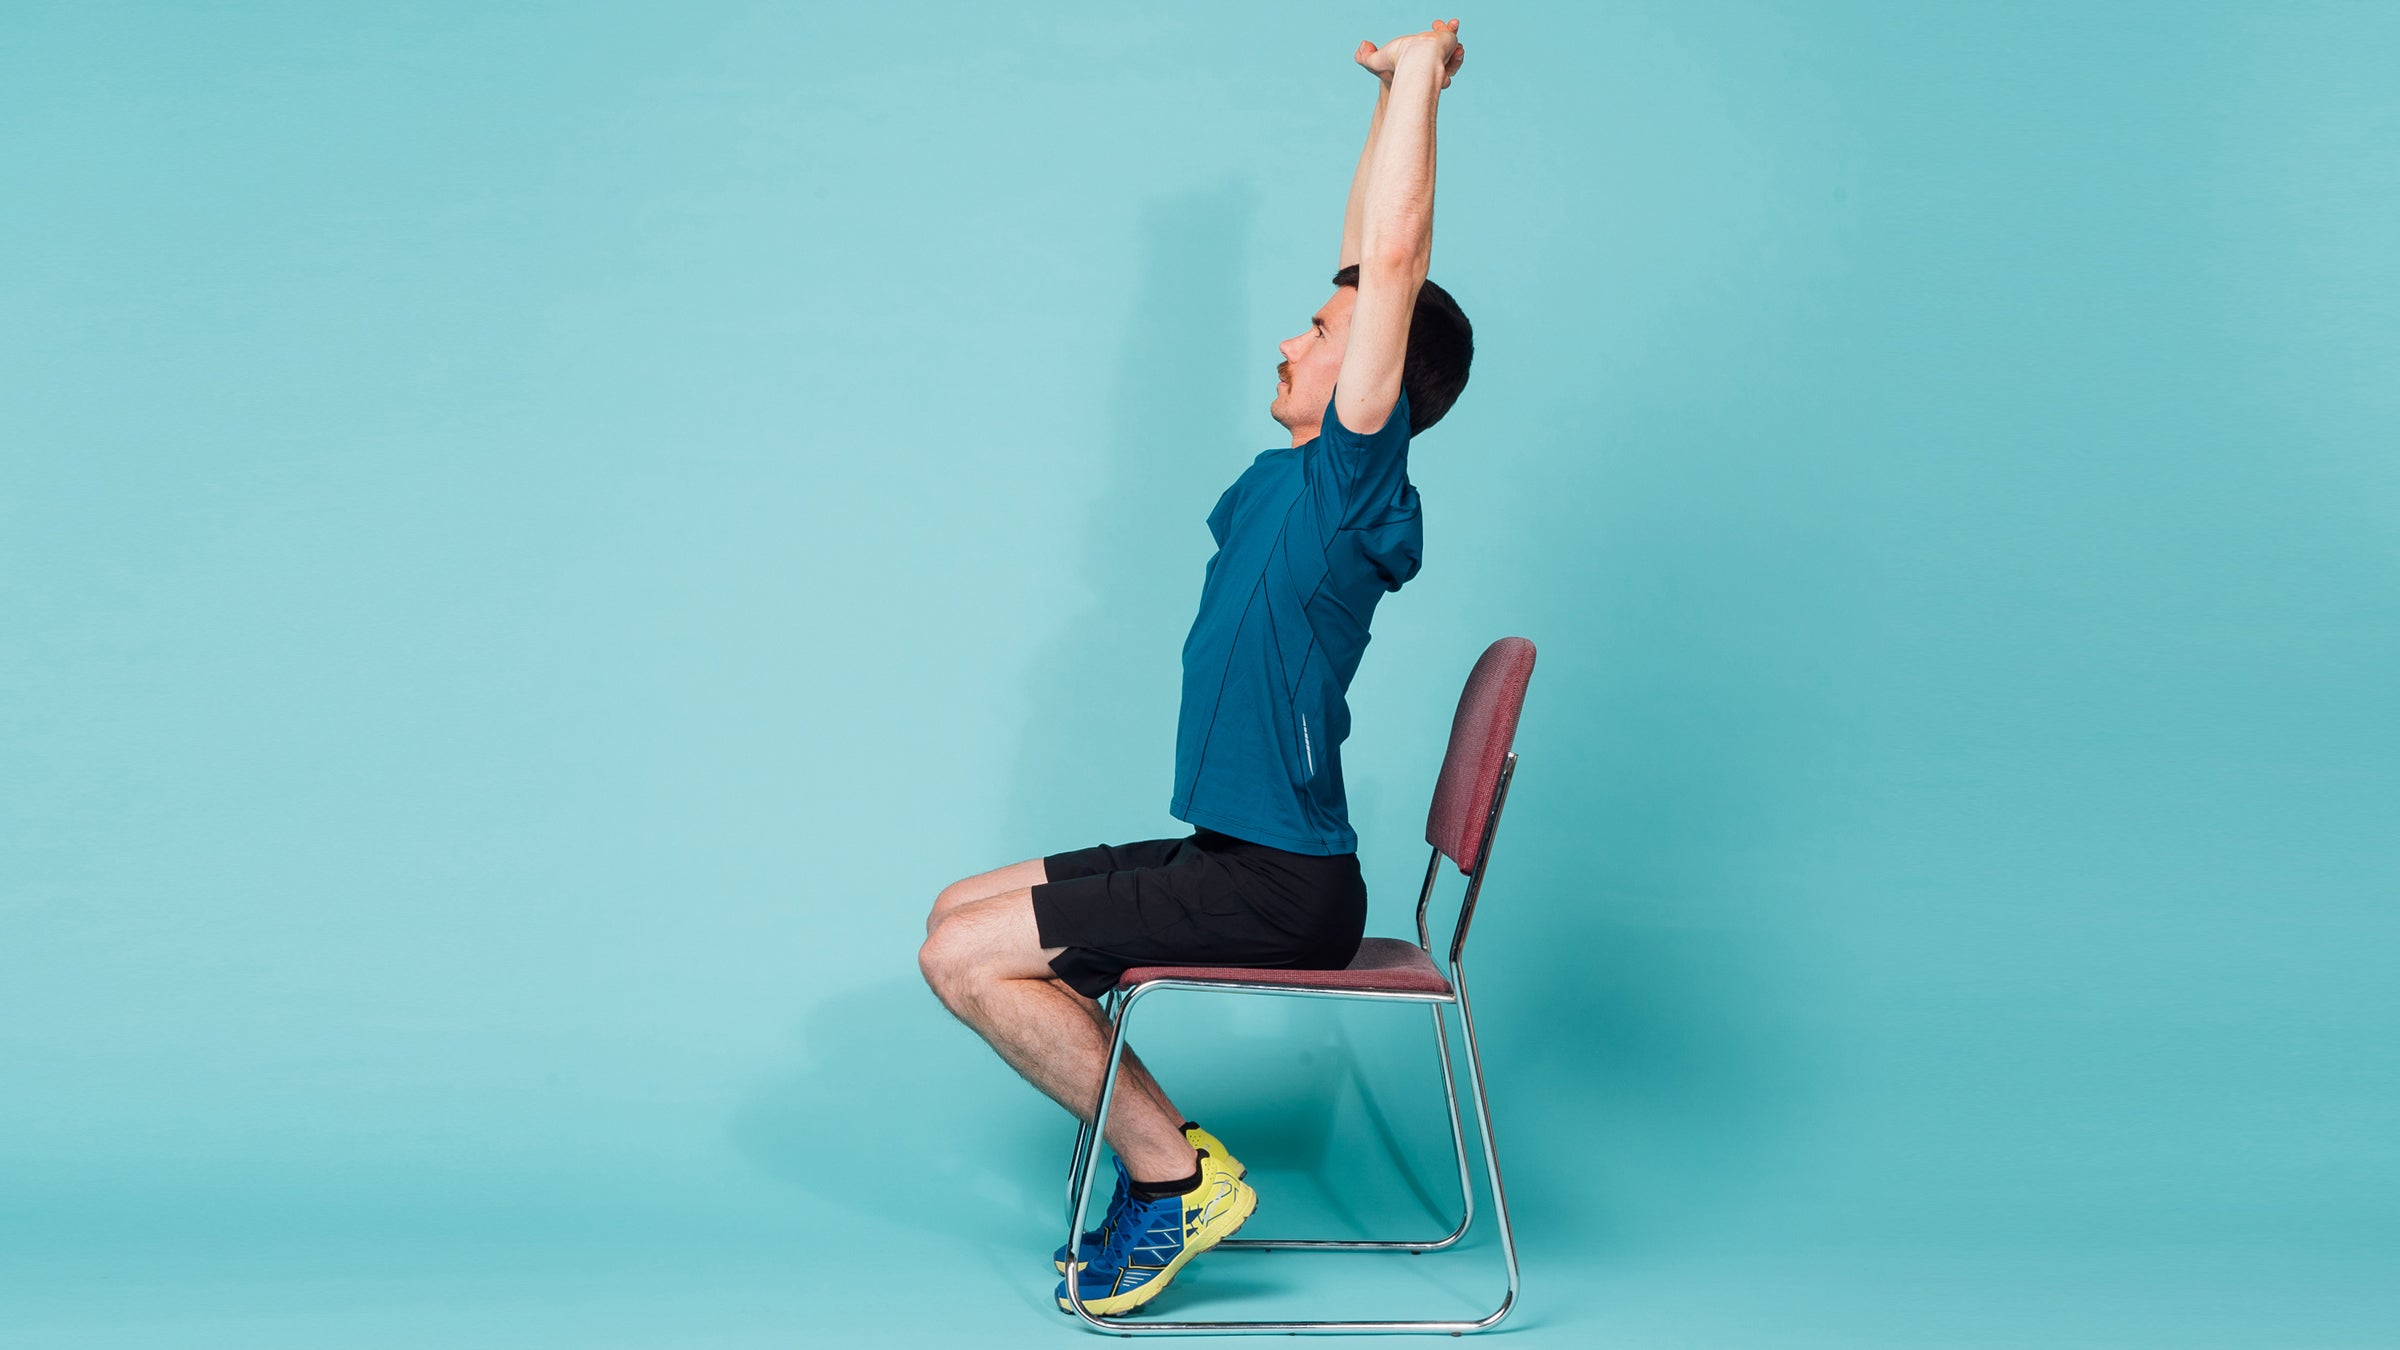 This Quick Full-Body Stretching Routine Will Help Loosen Stiff